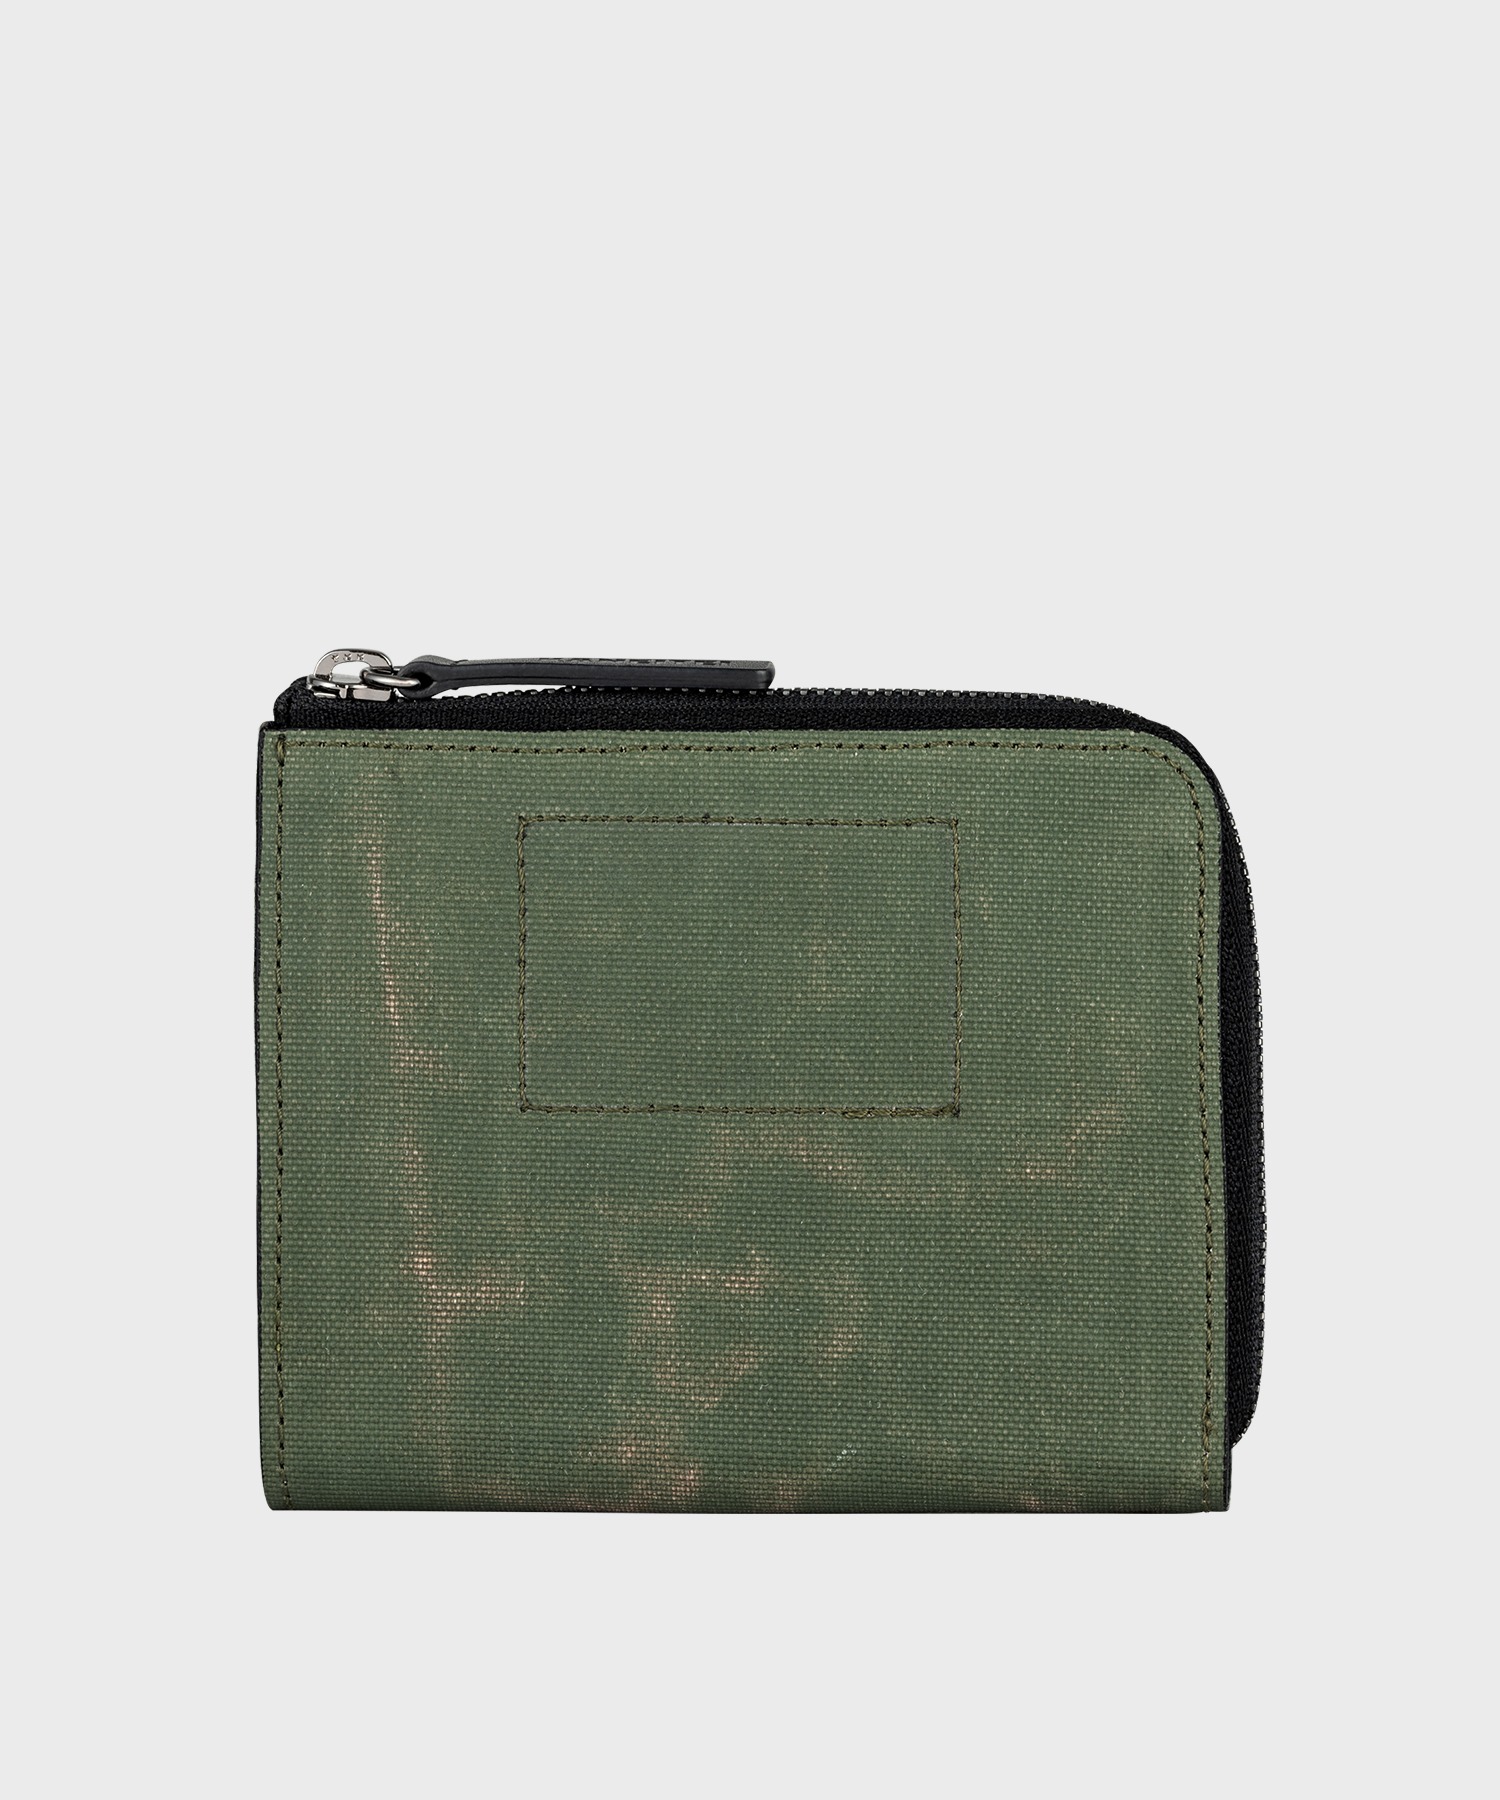 CAMEL ZIP AROUND WALLET (OLIVE DRAB) / UPCYCLED